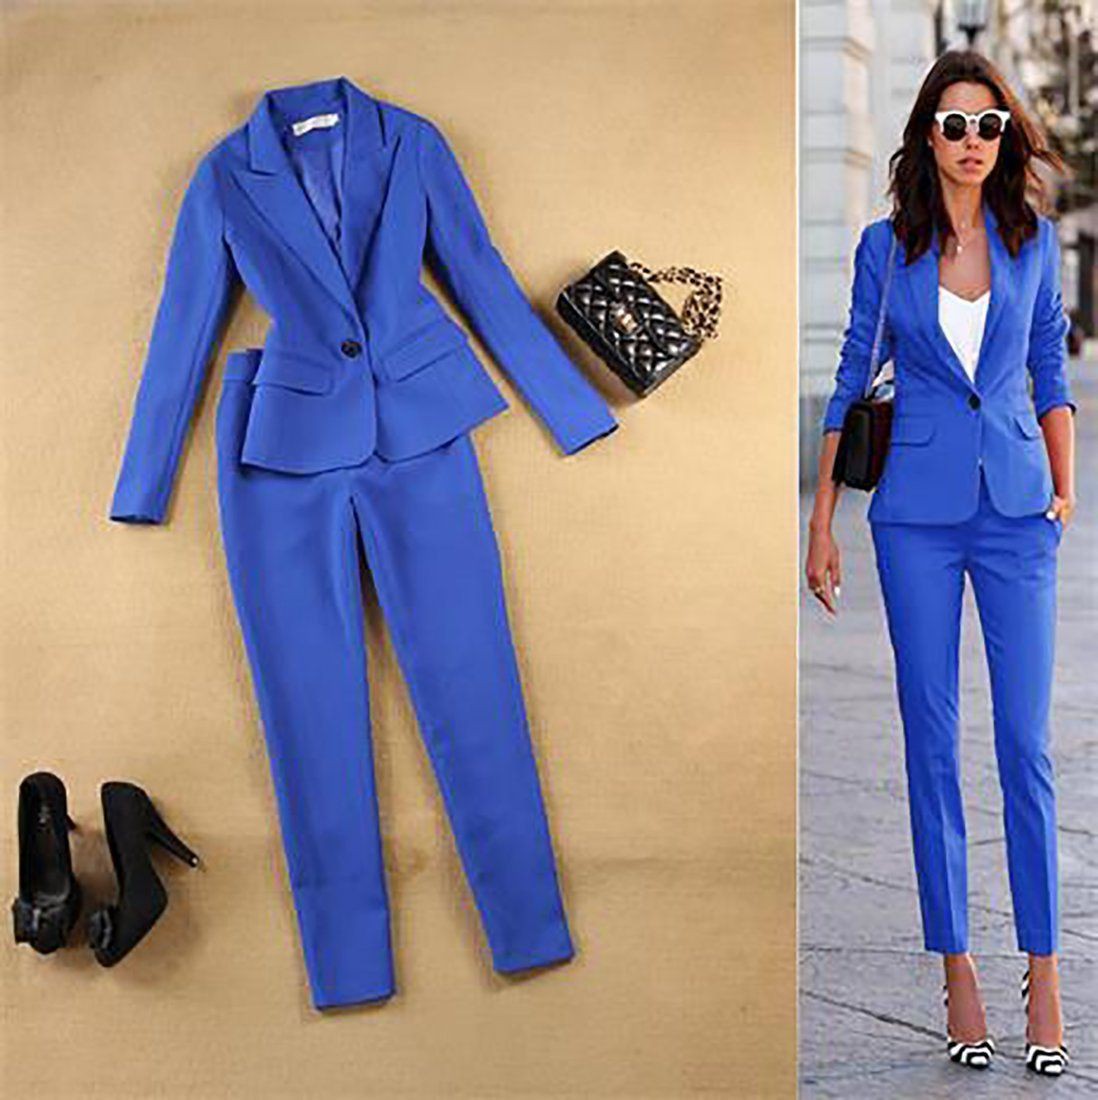 Check out these great images of womens business suit, Formal wear | Blue  Blazer Outfit Women | Blazer Outfit, Business casual, Formal wear